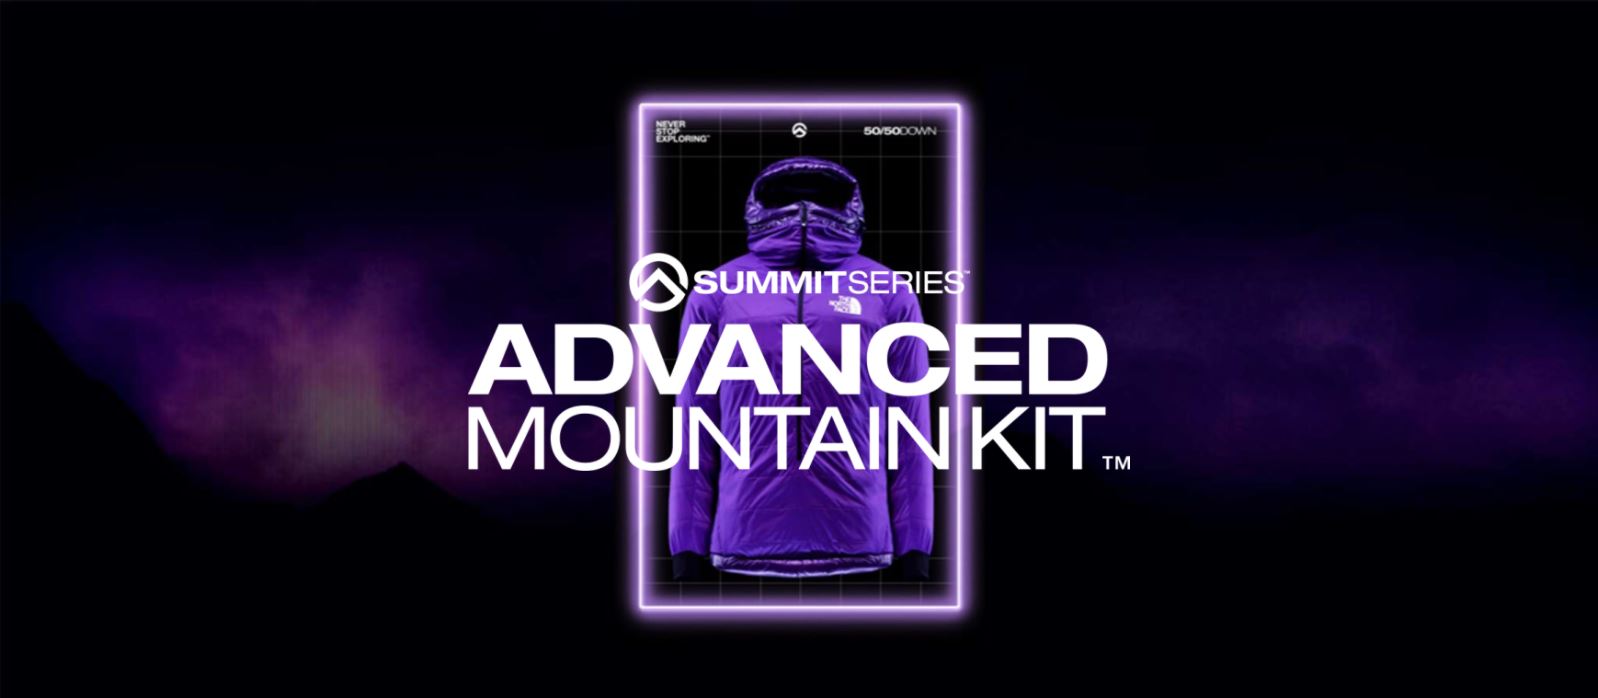 Advanced Mountain Kit The North Face – Alpine Mag